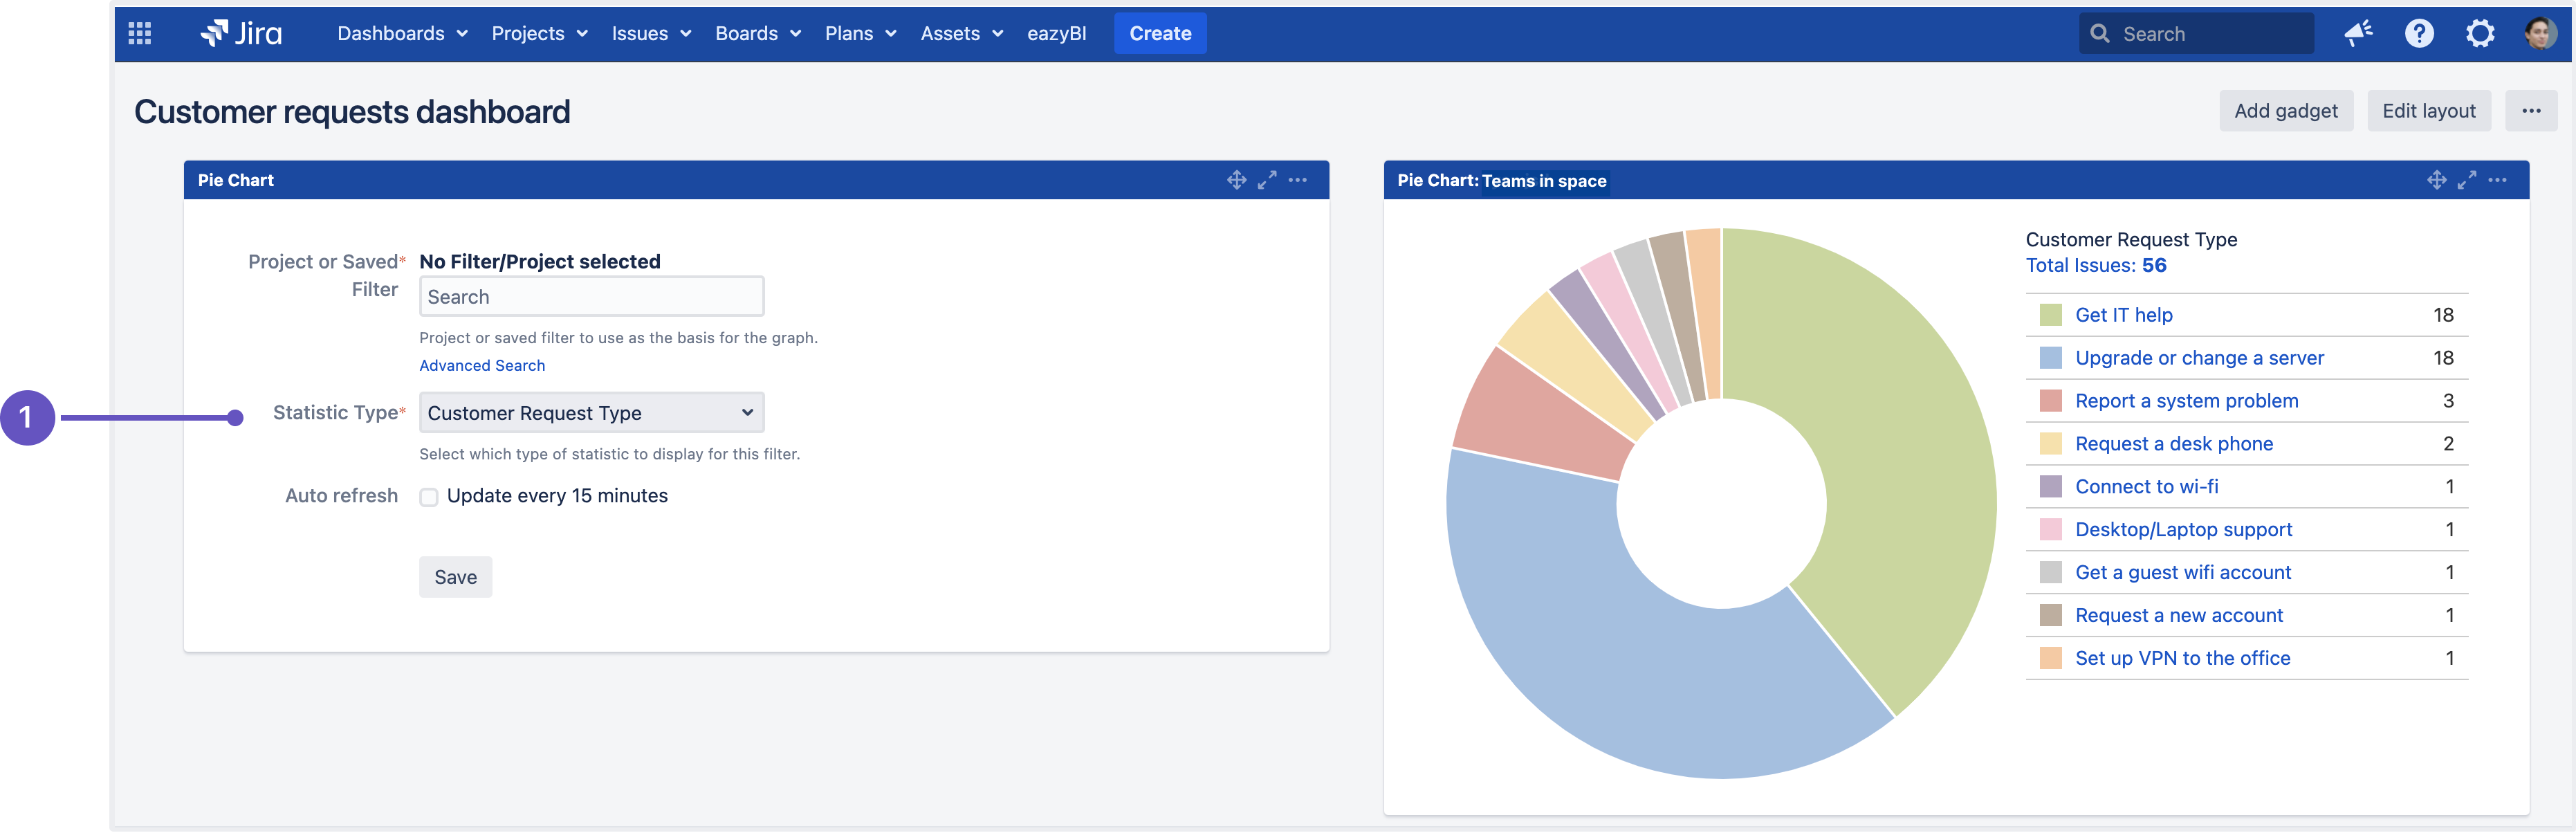 Customer request type field within pie chart gadget